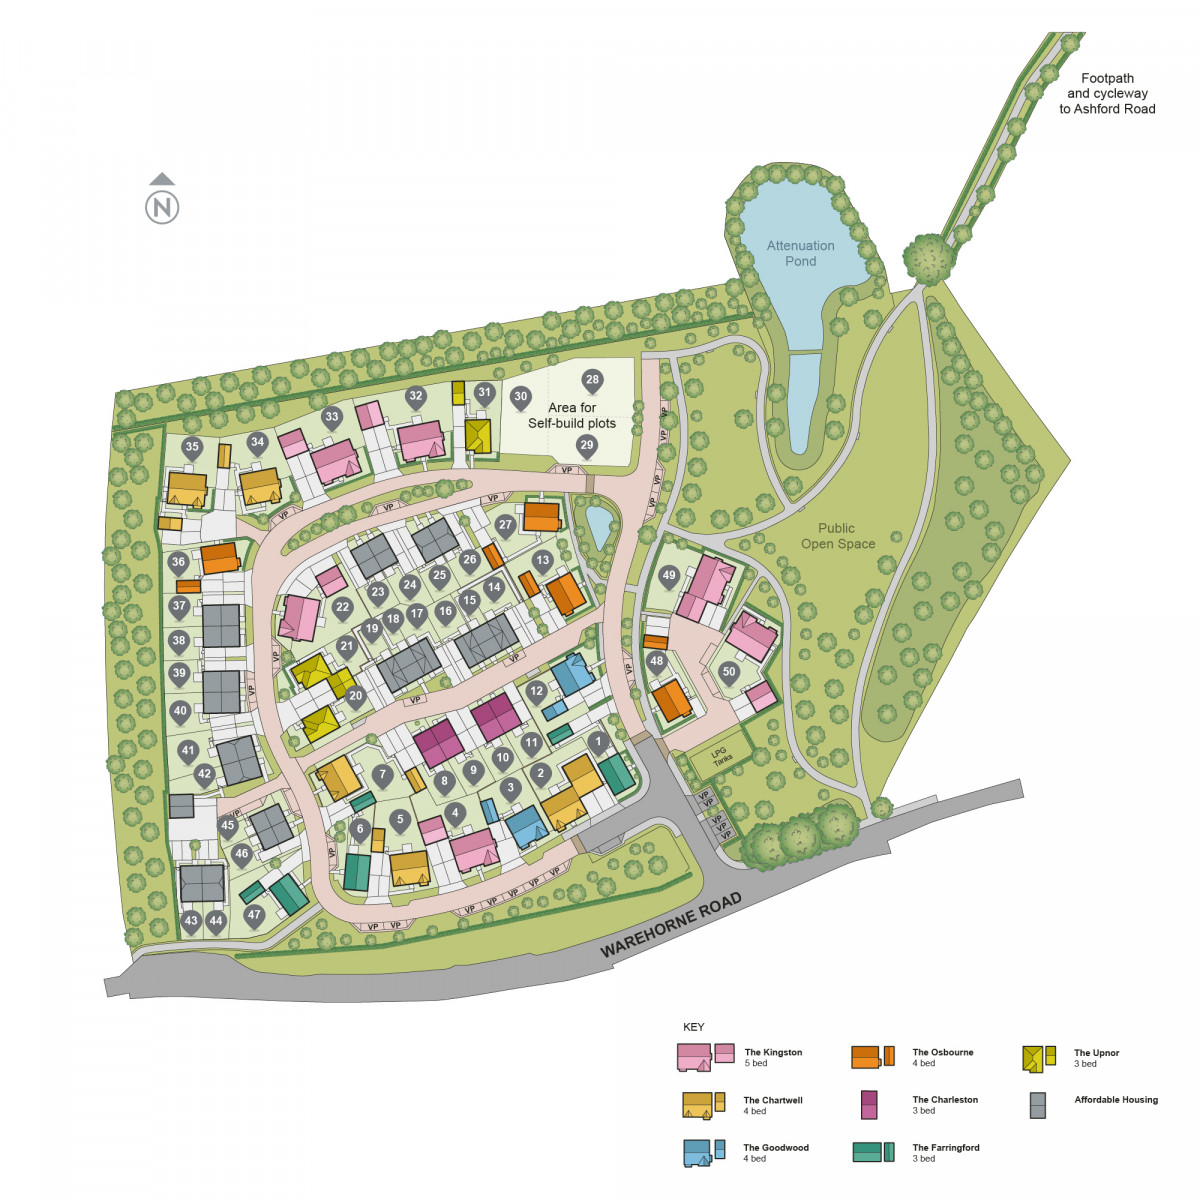 2161041 DAN South East The Pippins Siteplan WEB